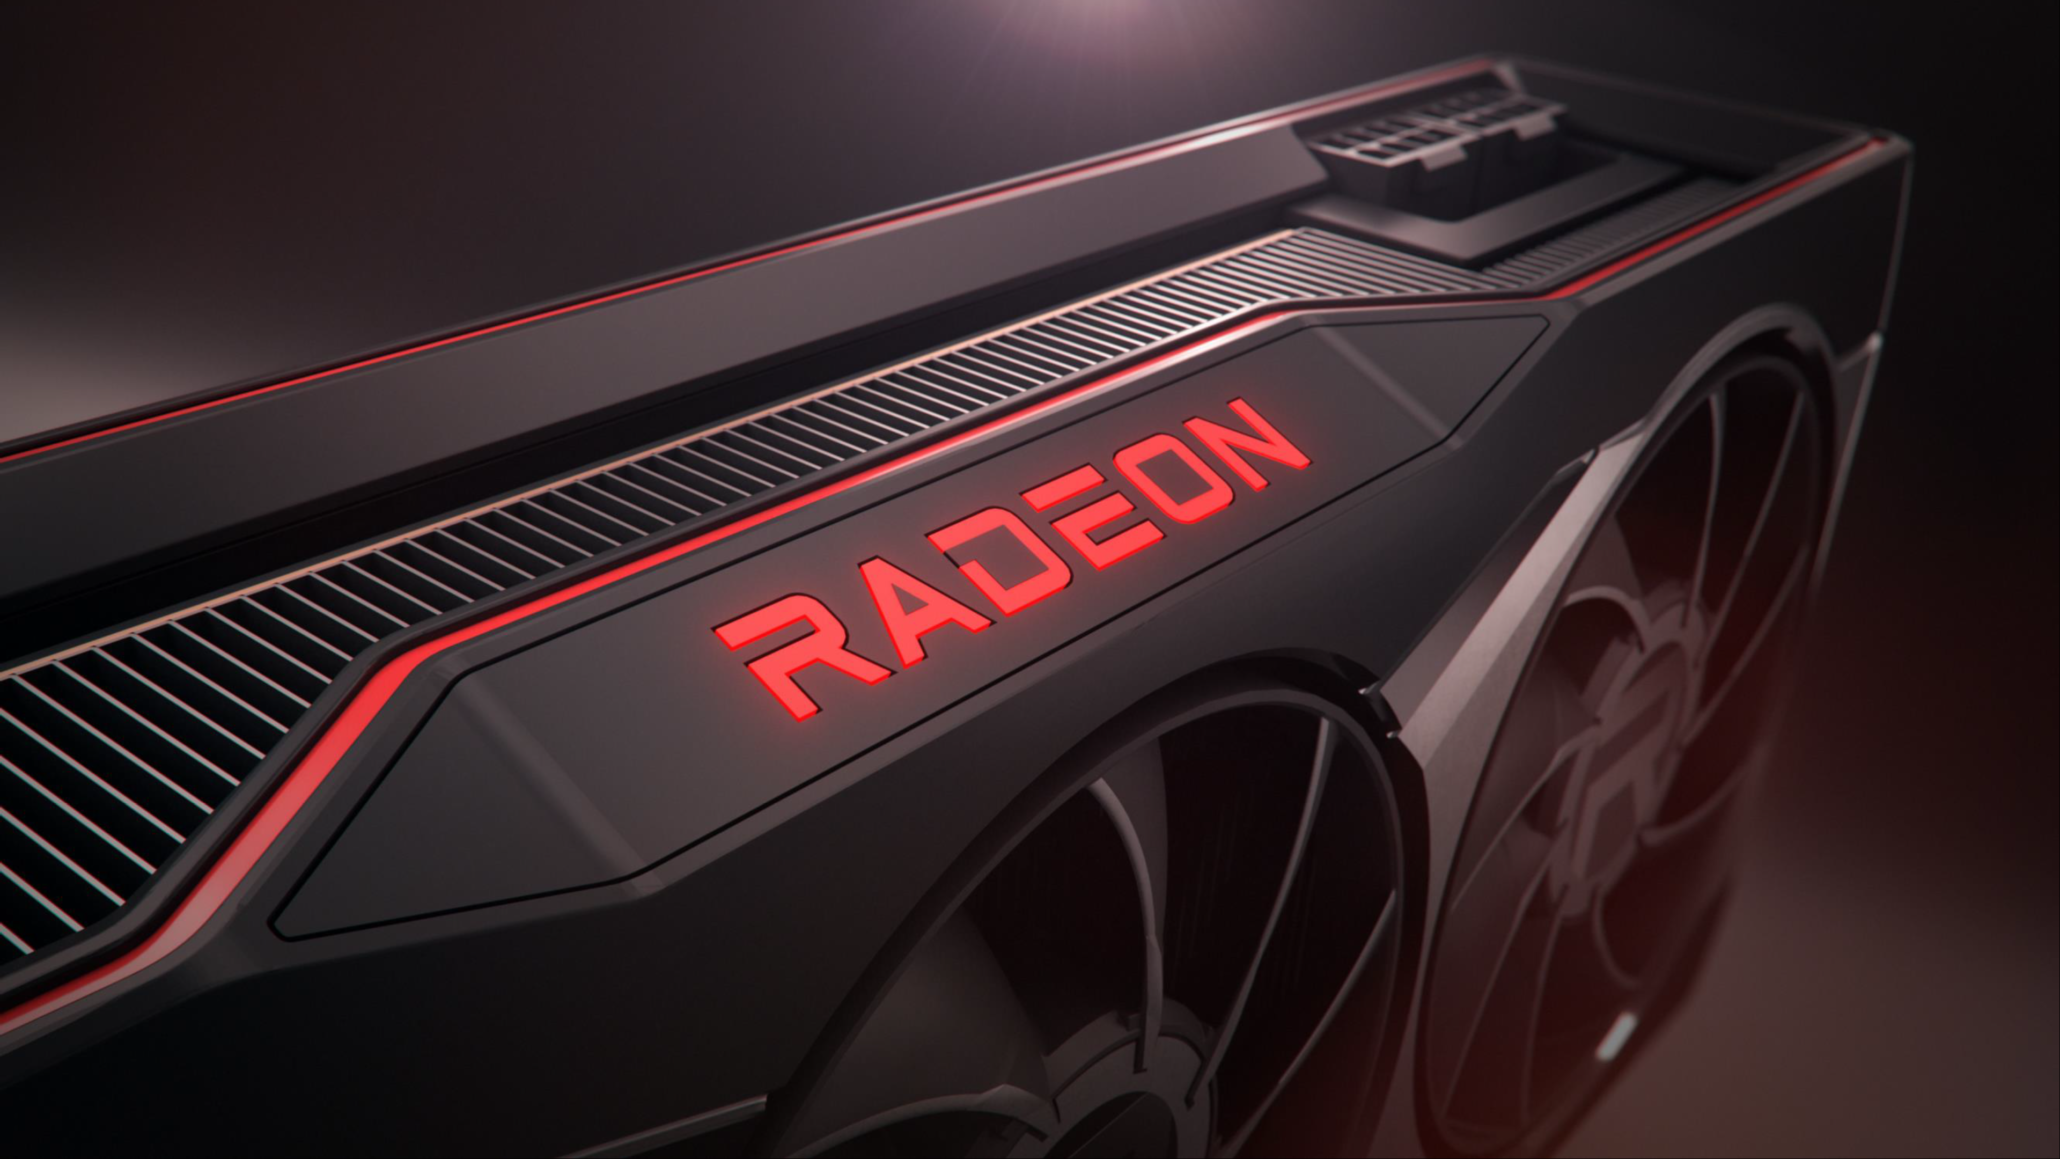 AMD Radeon RX 7900 XT could offer a 130% performance uplift over the Radeon  RX 6900 XT thanks to its multi-die Navi 31 GPU -  News